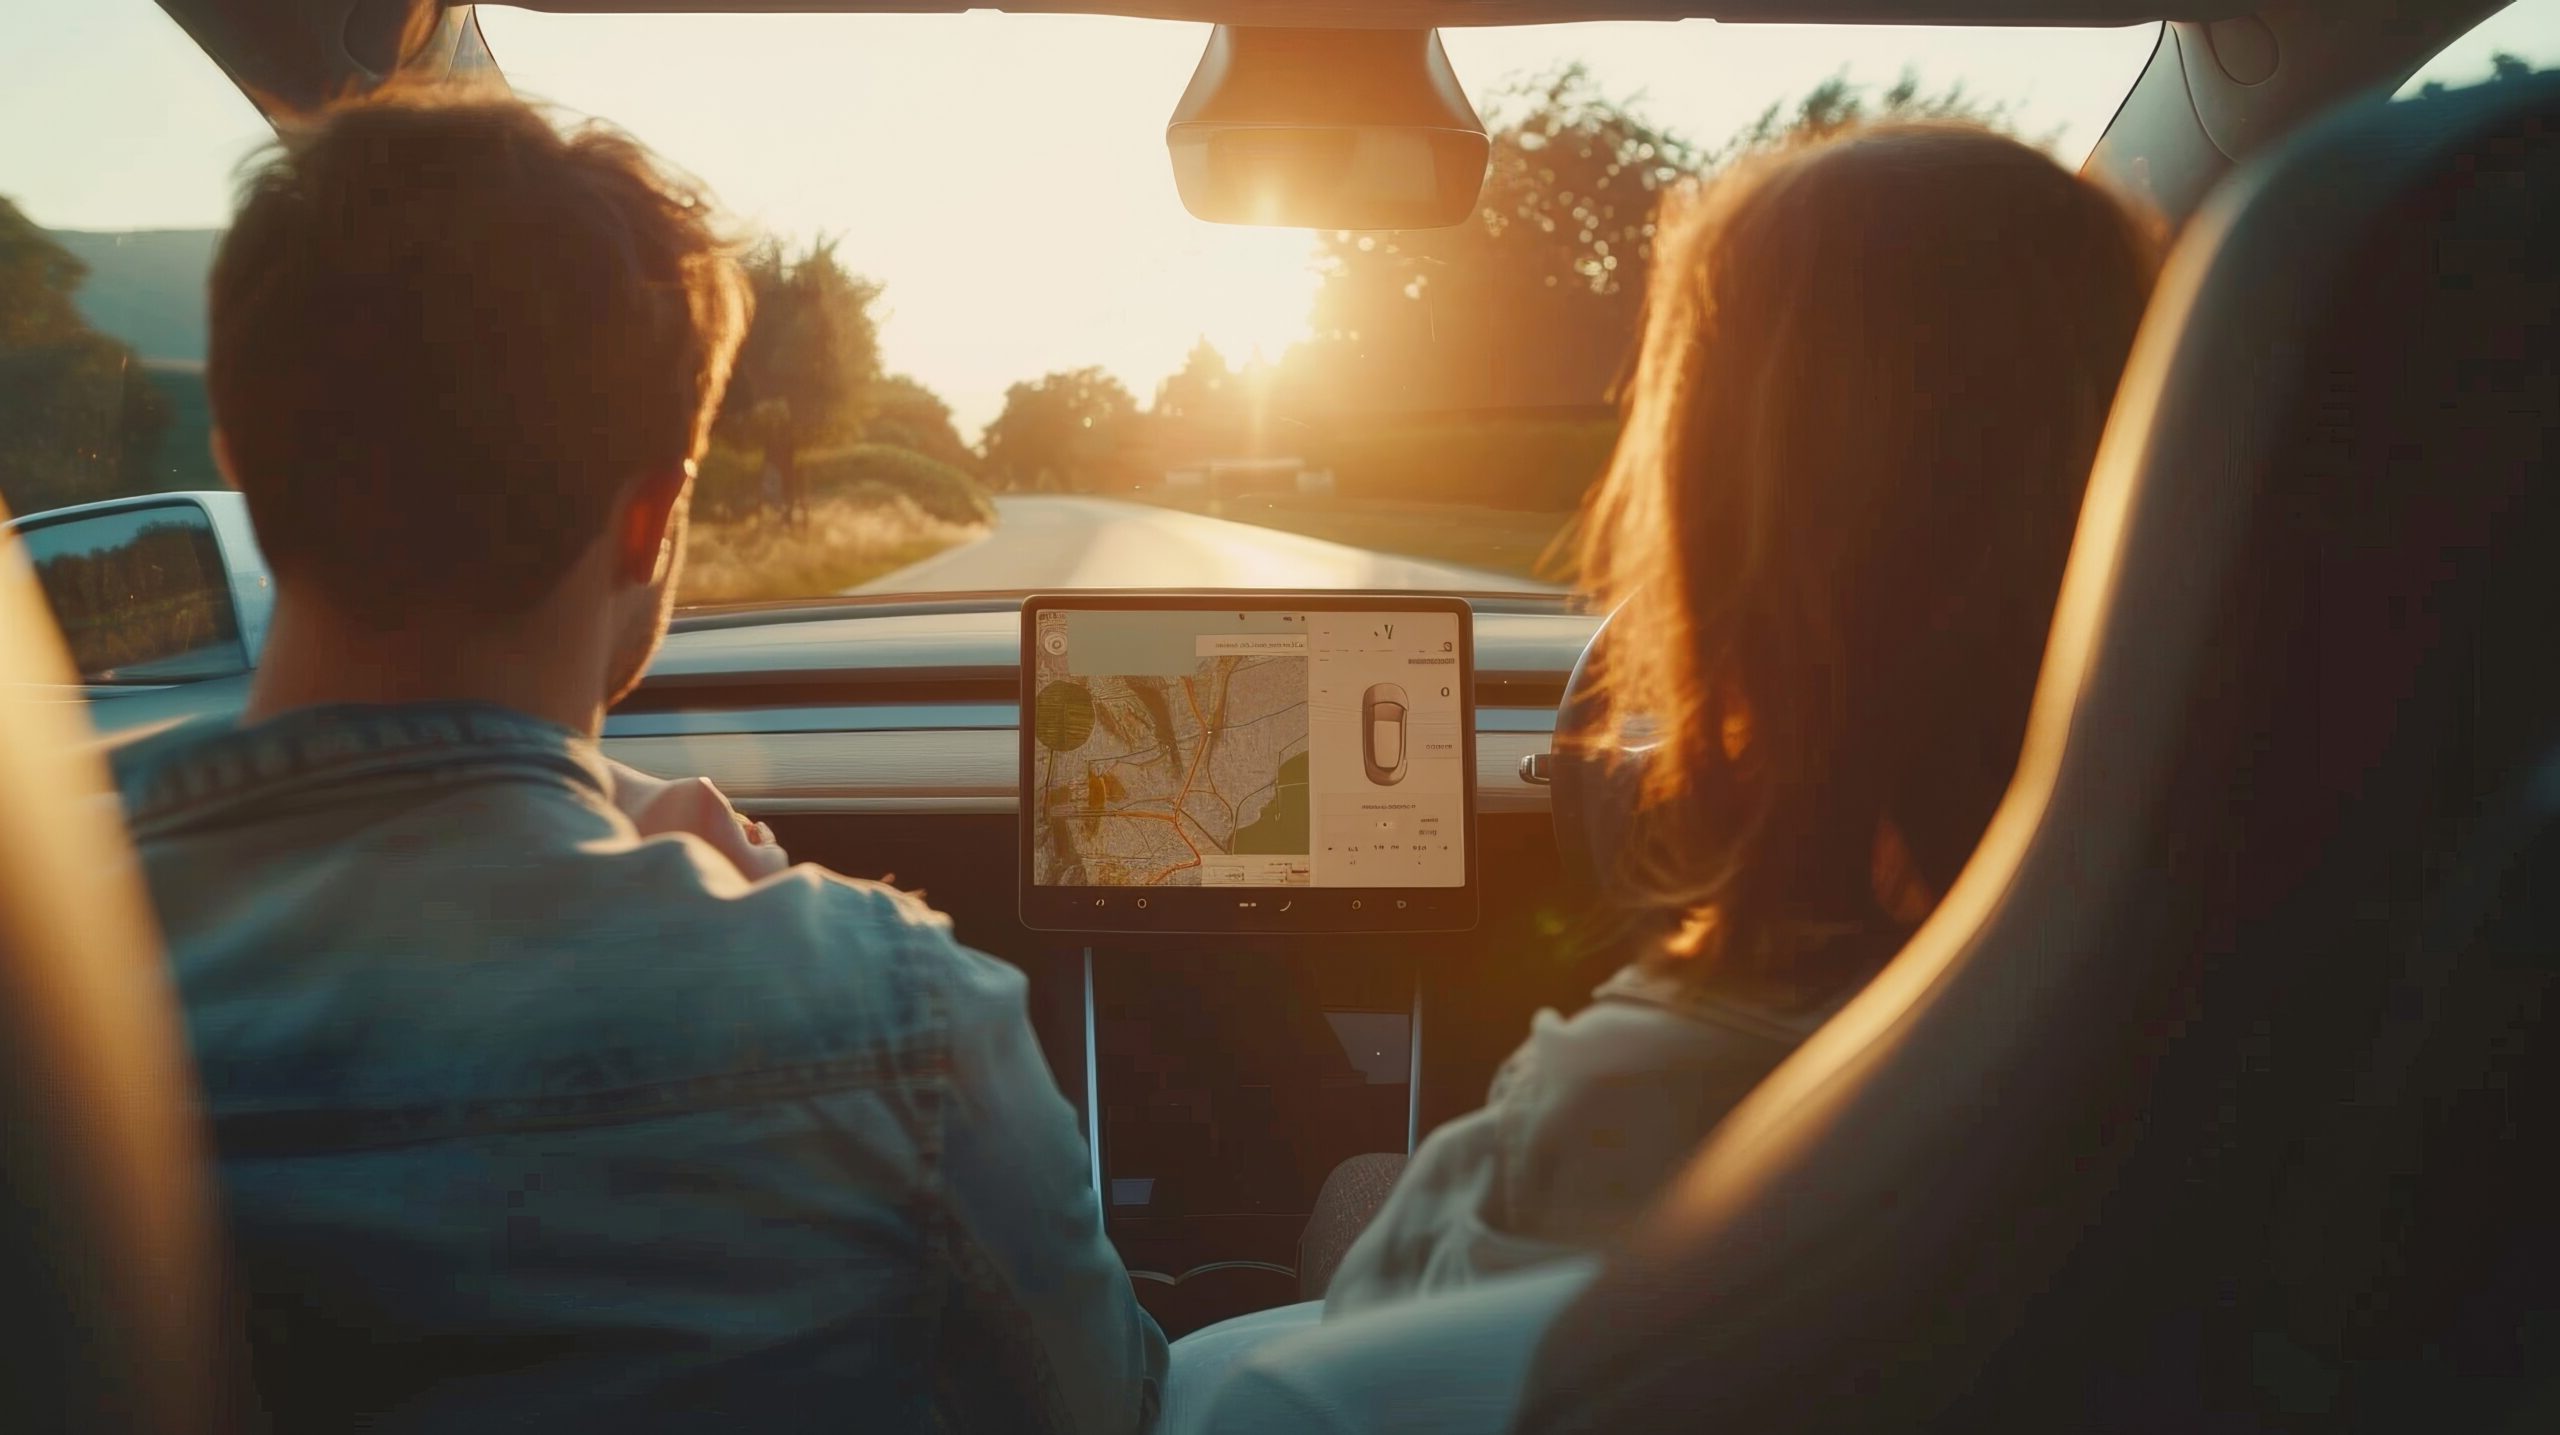 Young Family In A Modern Electric Car, Discussing The Map, Curious And Engaged, Sun Setting On The Horizon, Styled As Soft Focus With Golden Hour Lighting.